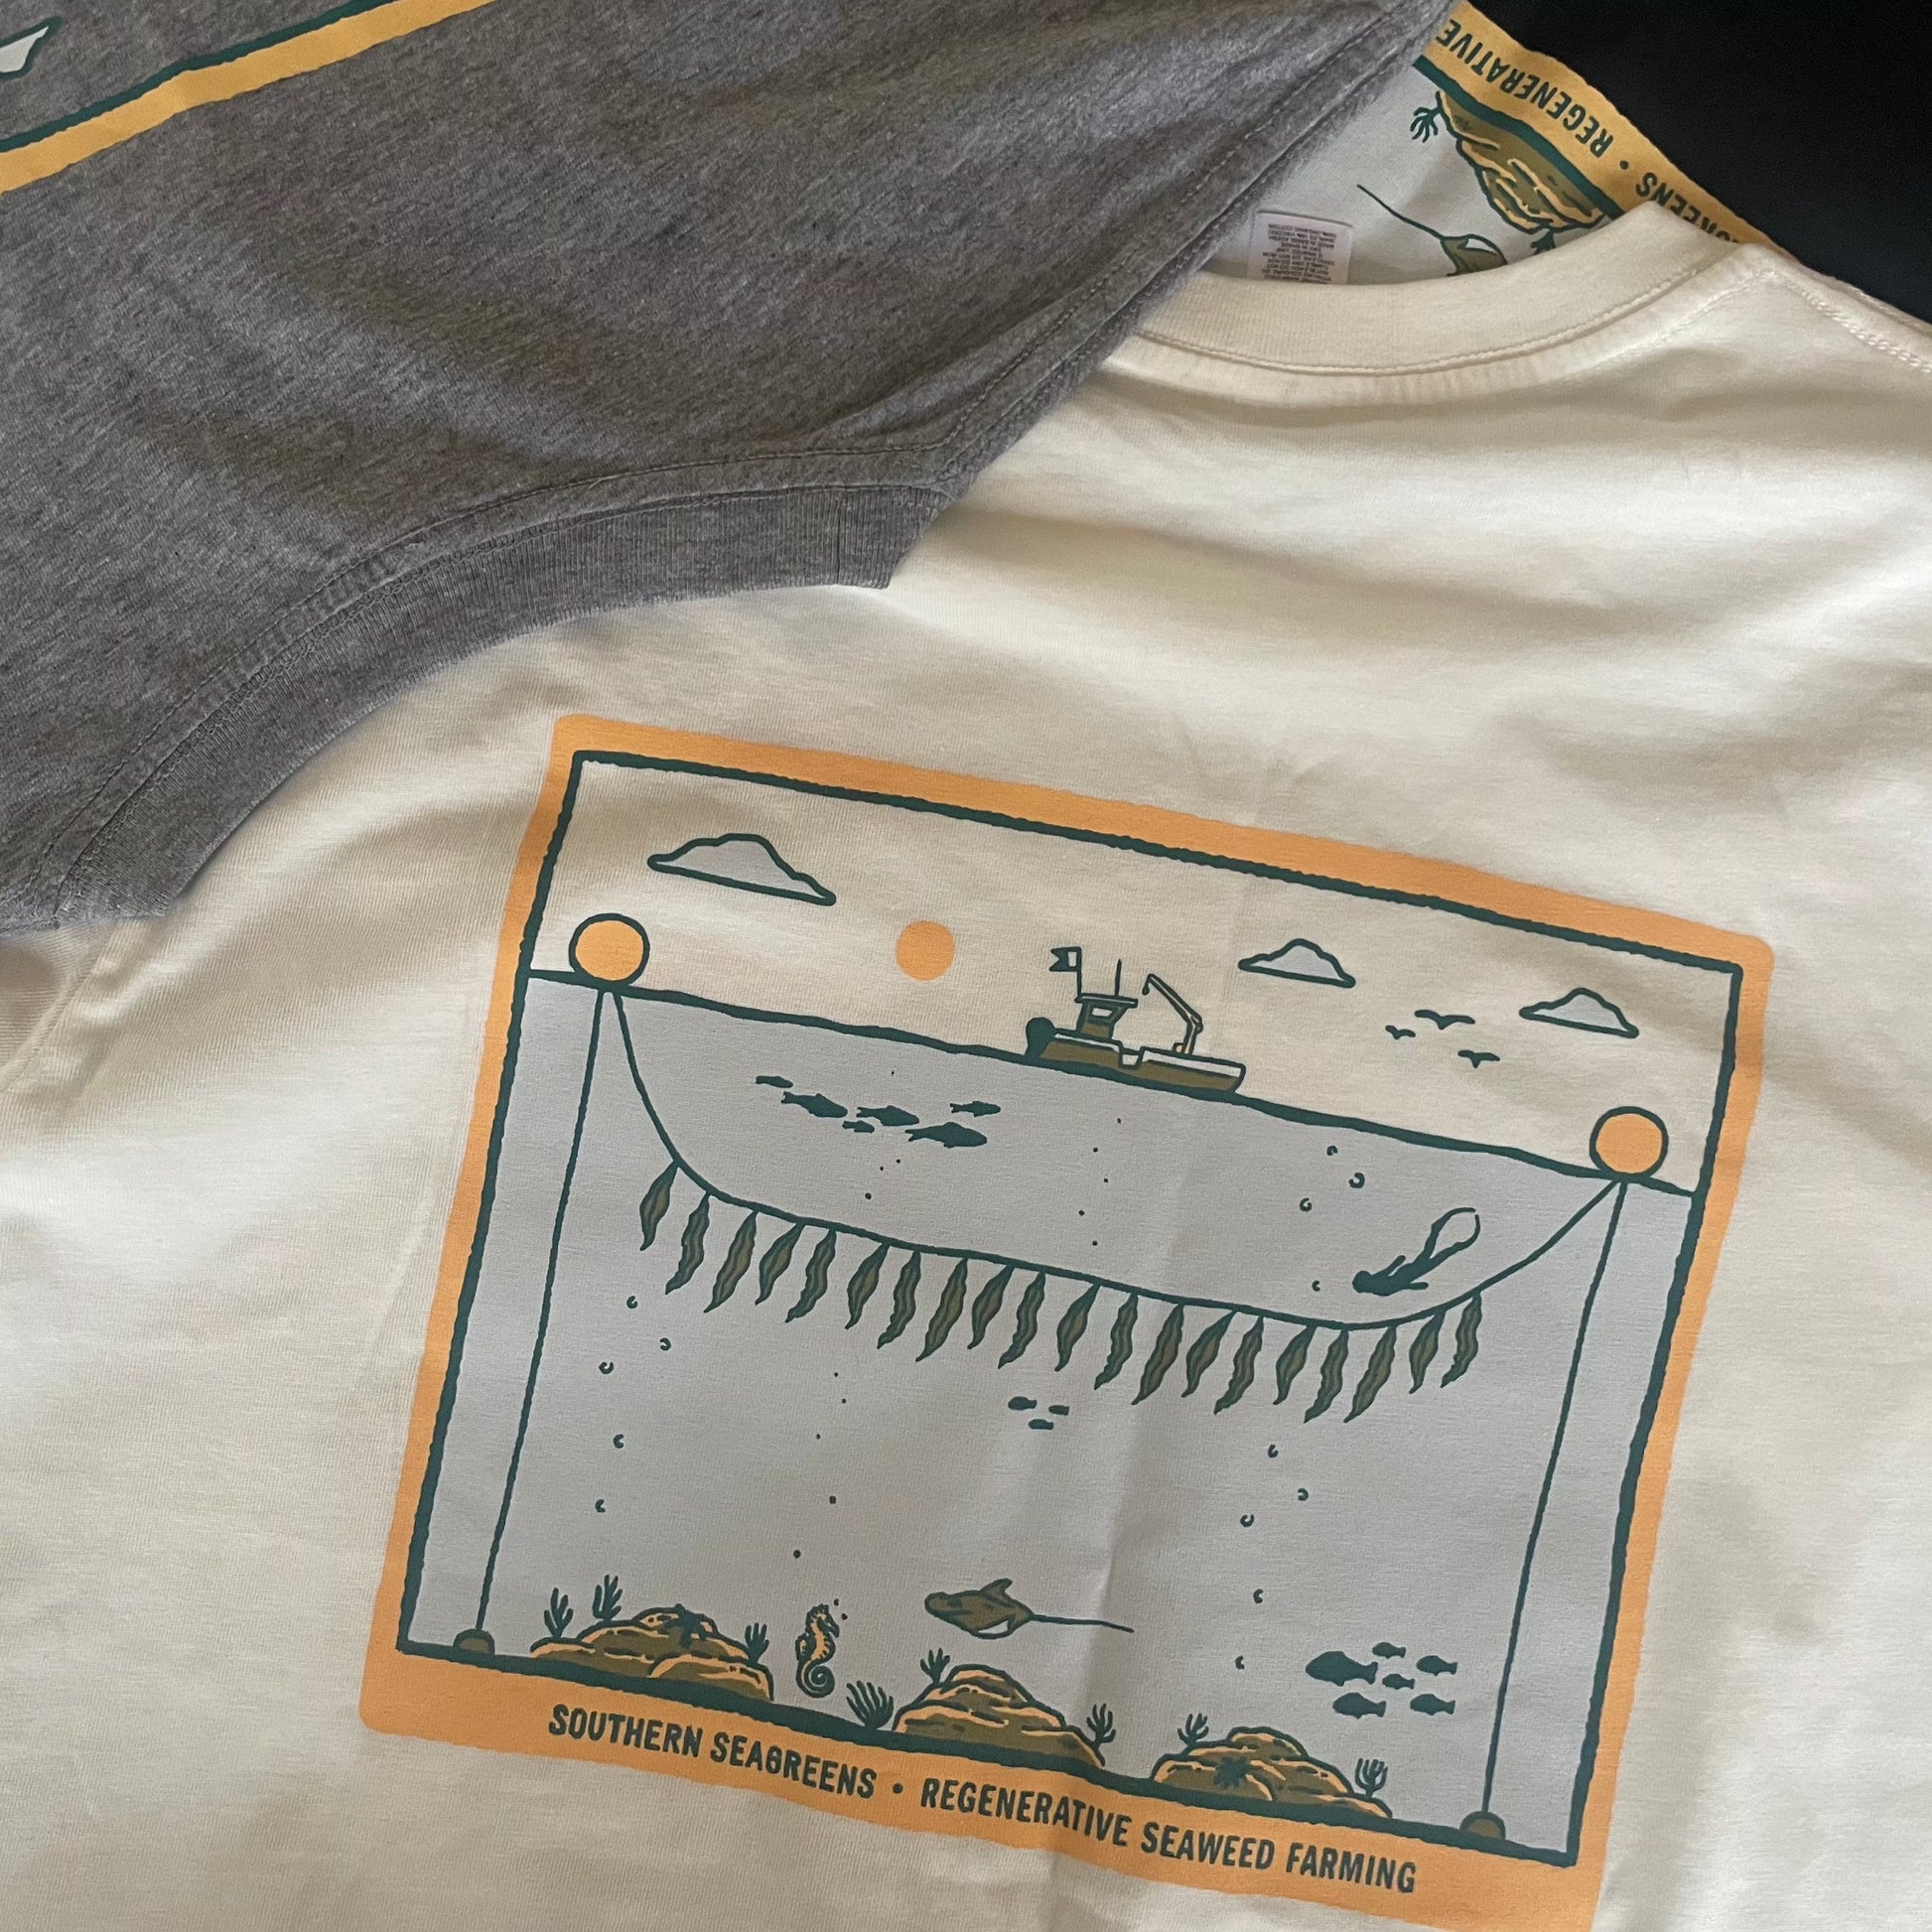 Southern Seagreens white tee shirt with seaweed kelp farm illustration with boat, diver, fish. 